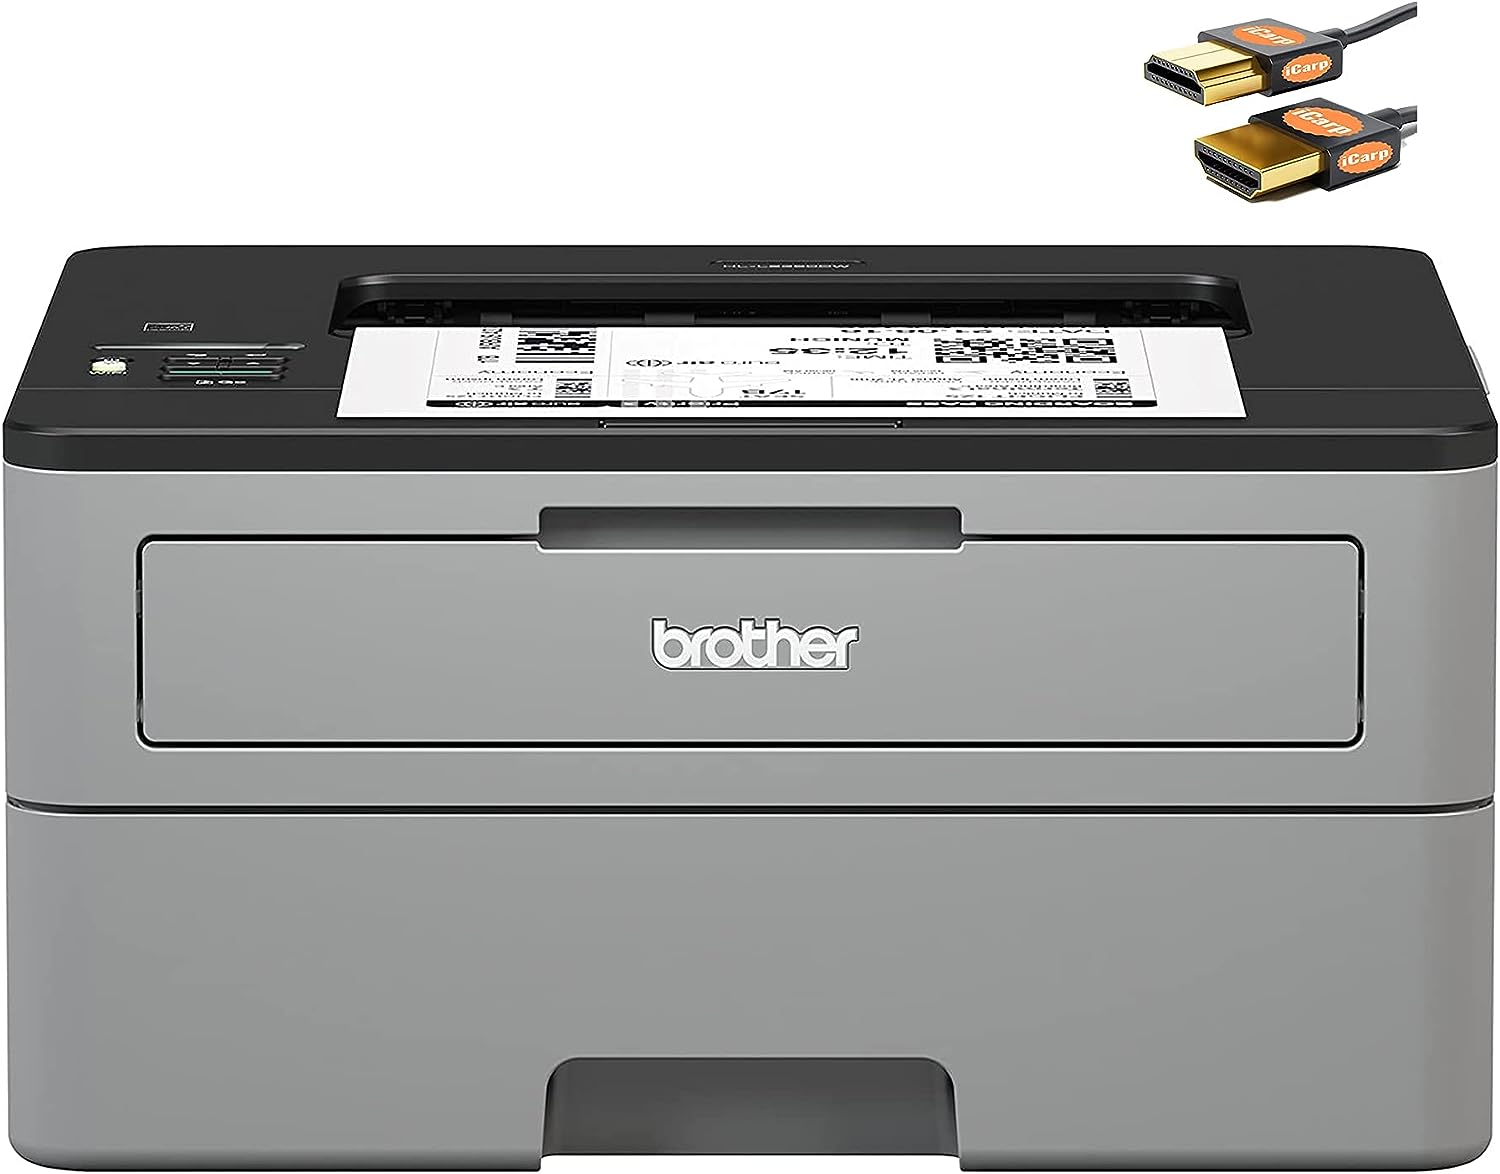 Review of Brother HL-L2350DW Series Compact Wireless Monochrome Laser Printer